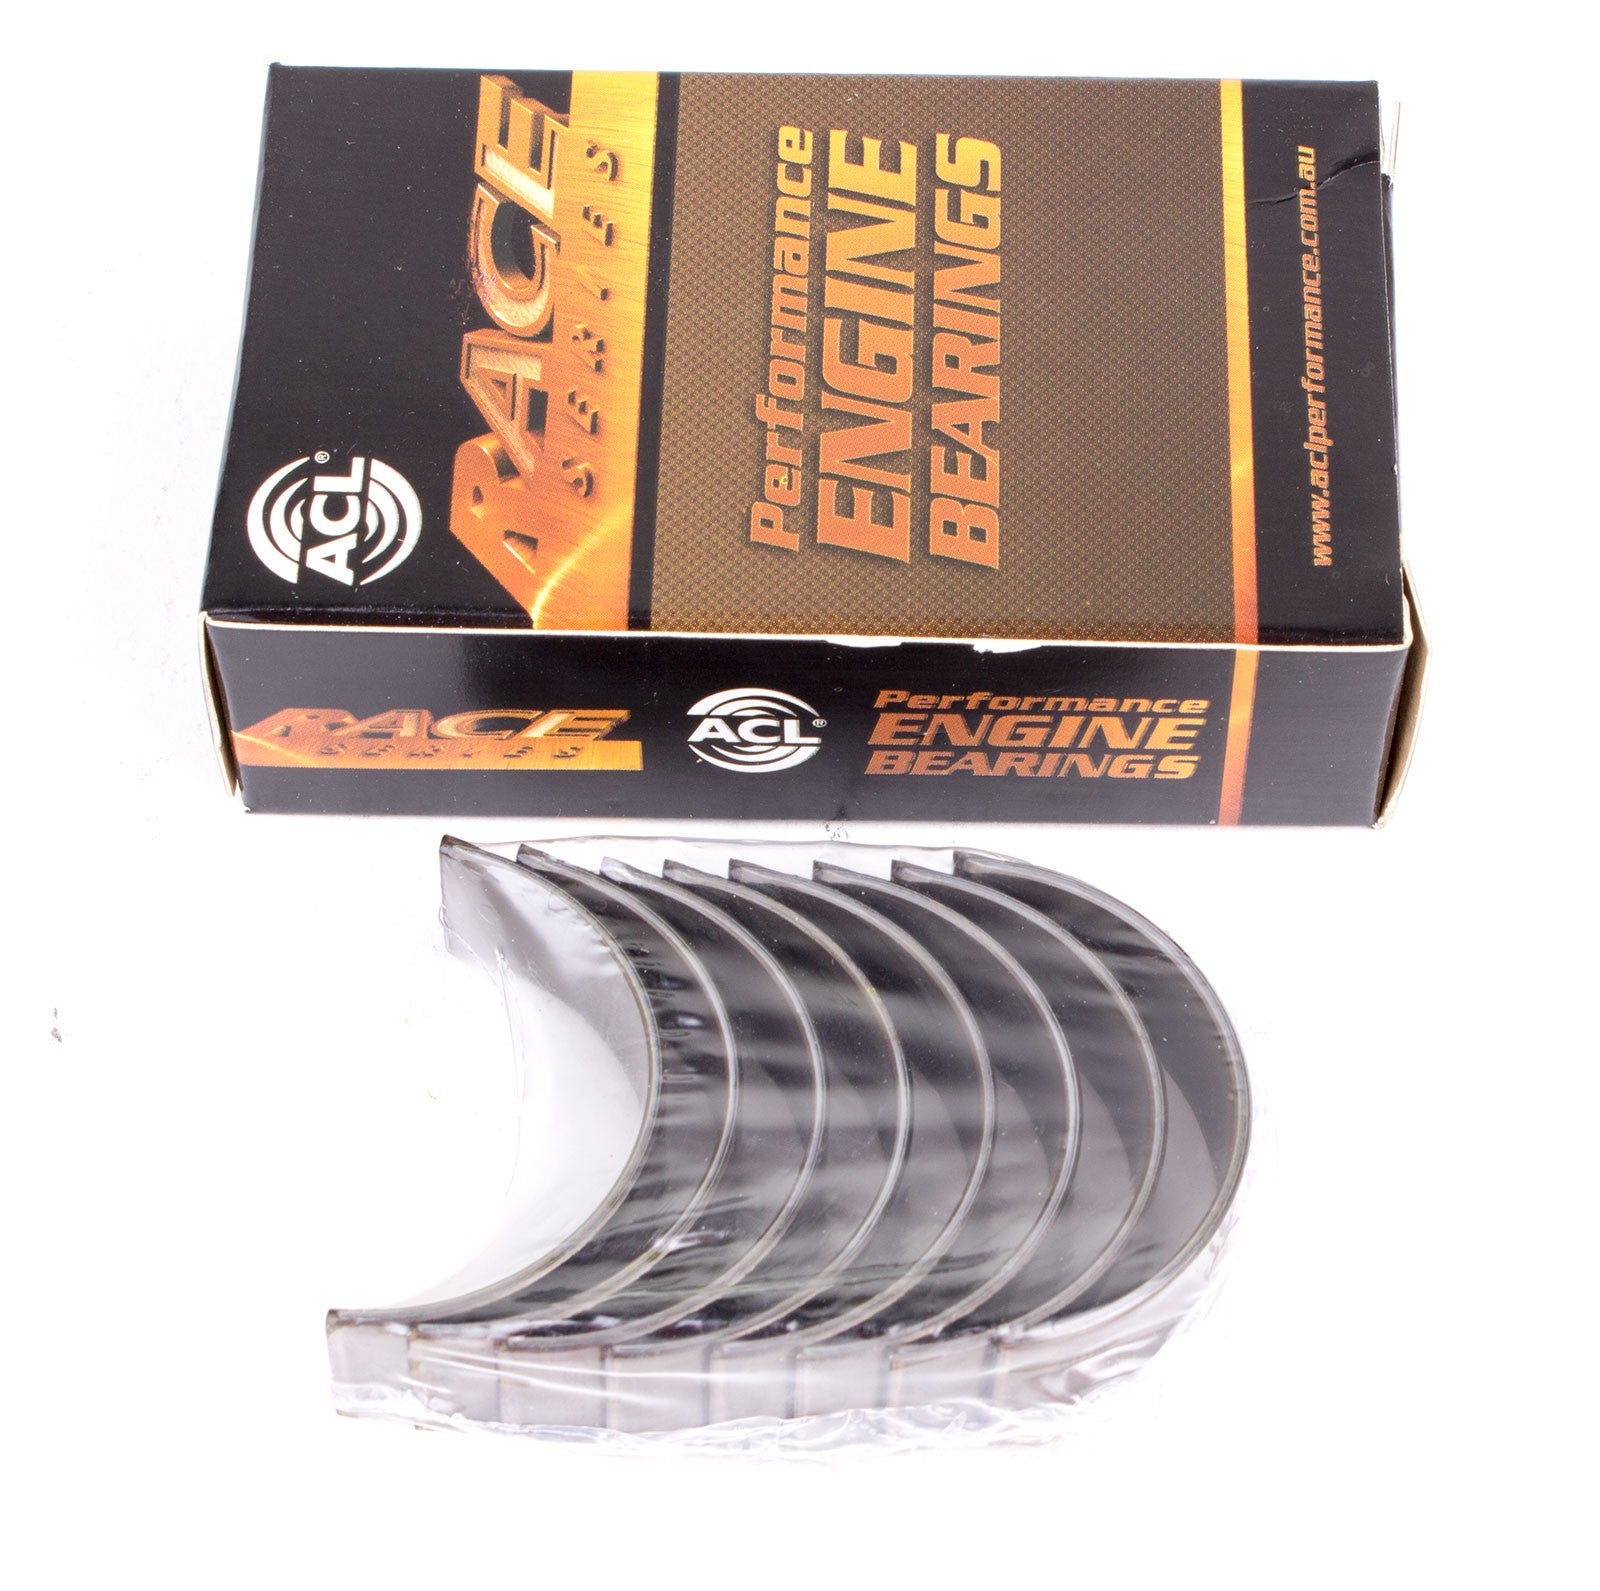 ACL 5M590H-001 Main bearing set (ACL Race Series) Photo-0 